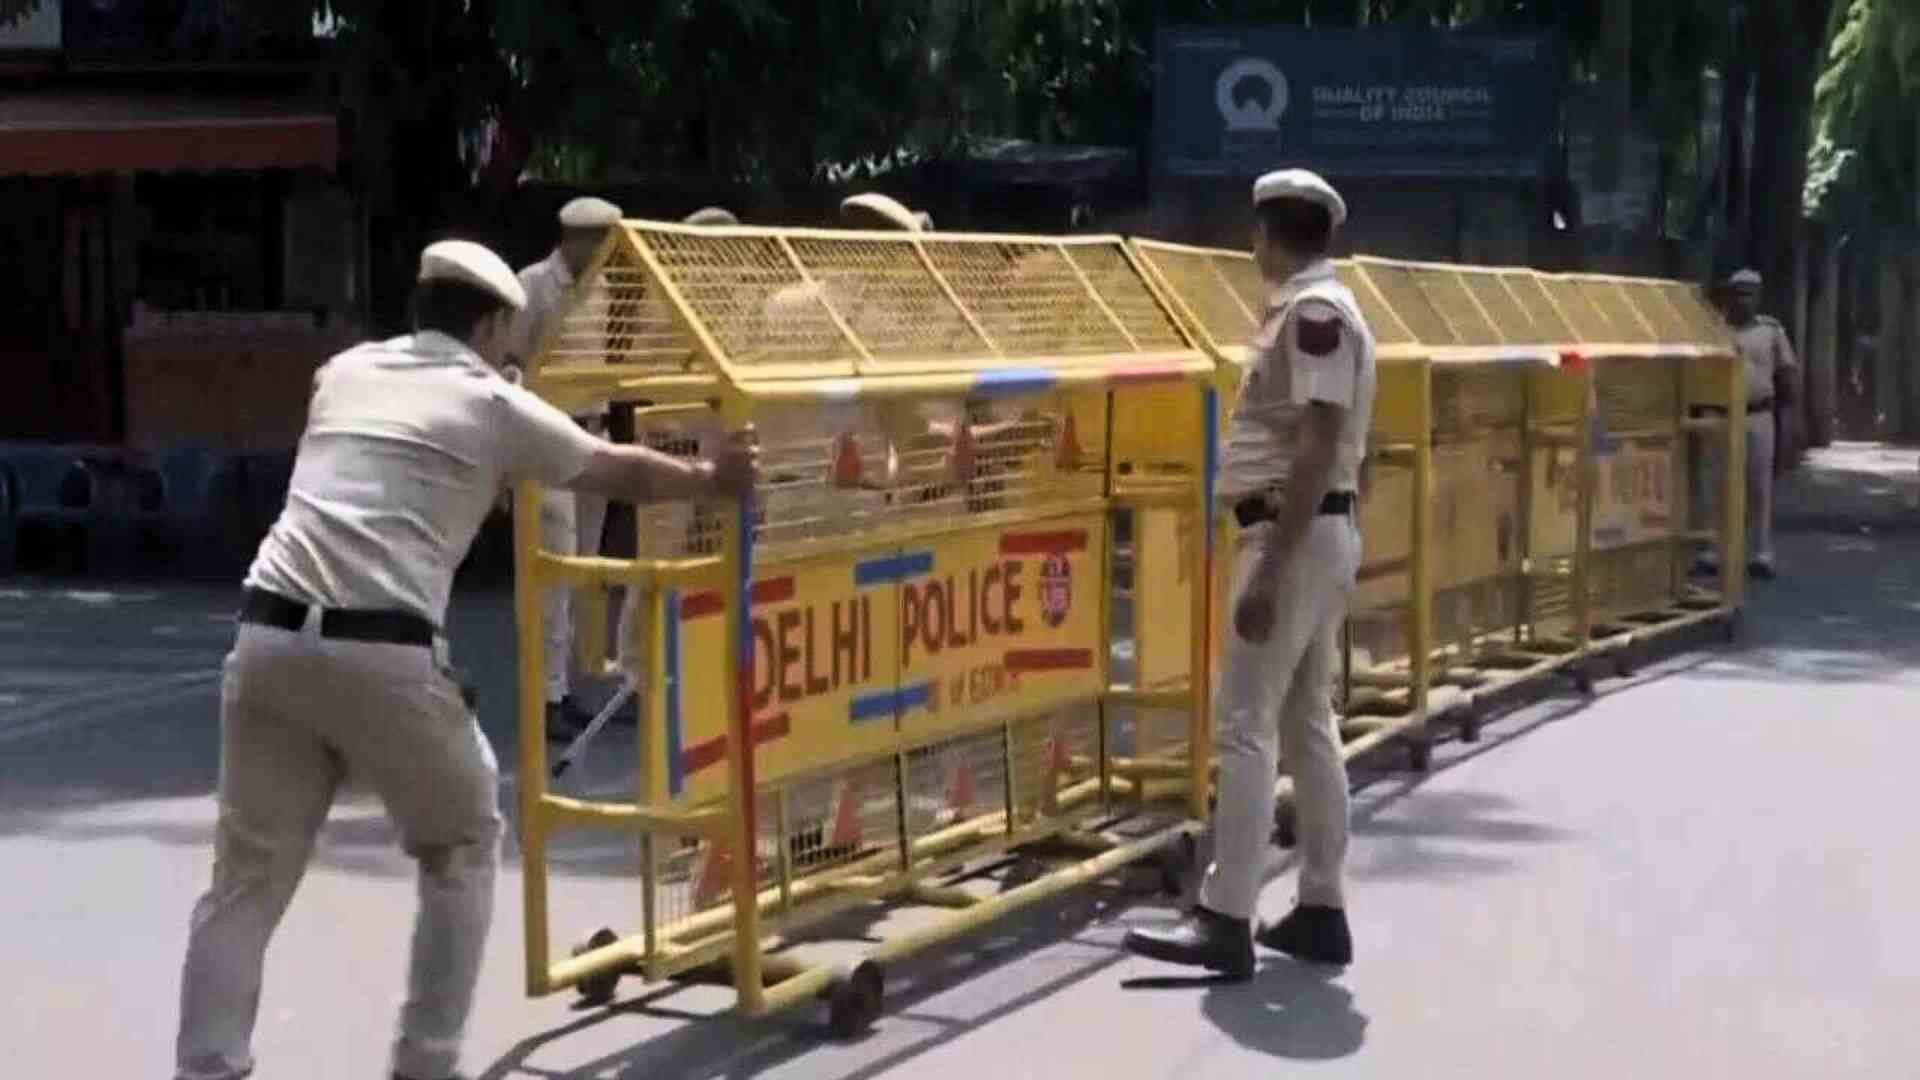 Mumbai: BMC HQ Receives Threatening E-Mail To Blow Up The Building Hours After The Hospitals Bomb Threat, Police Reported